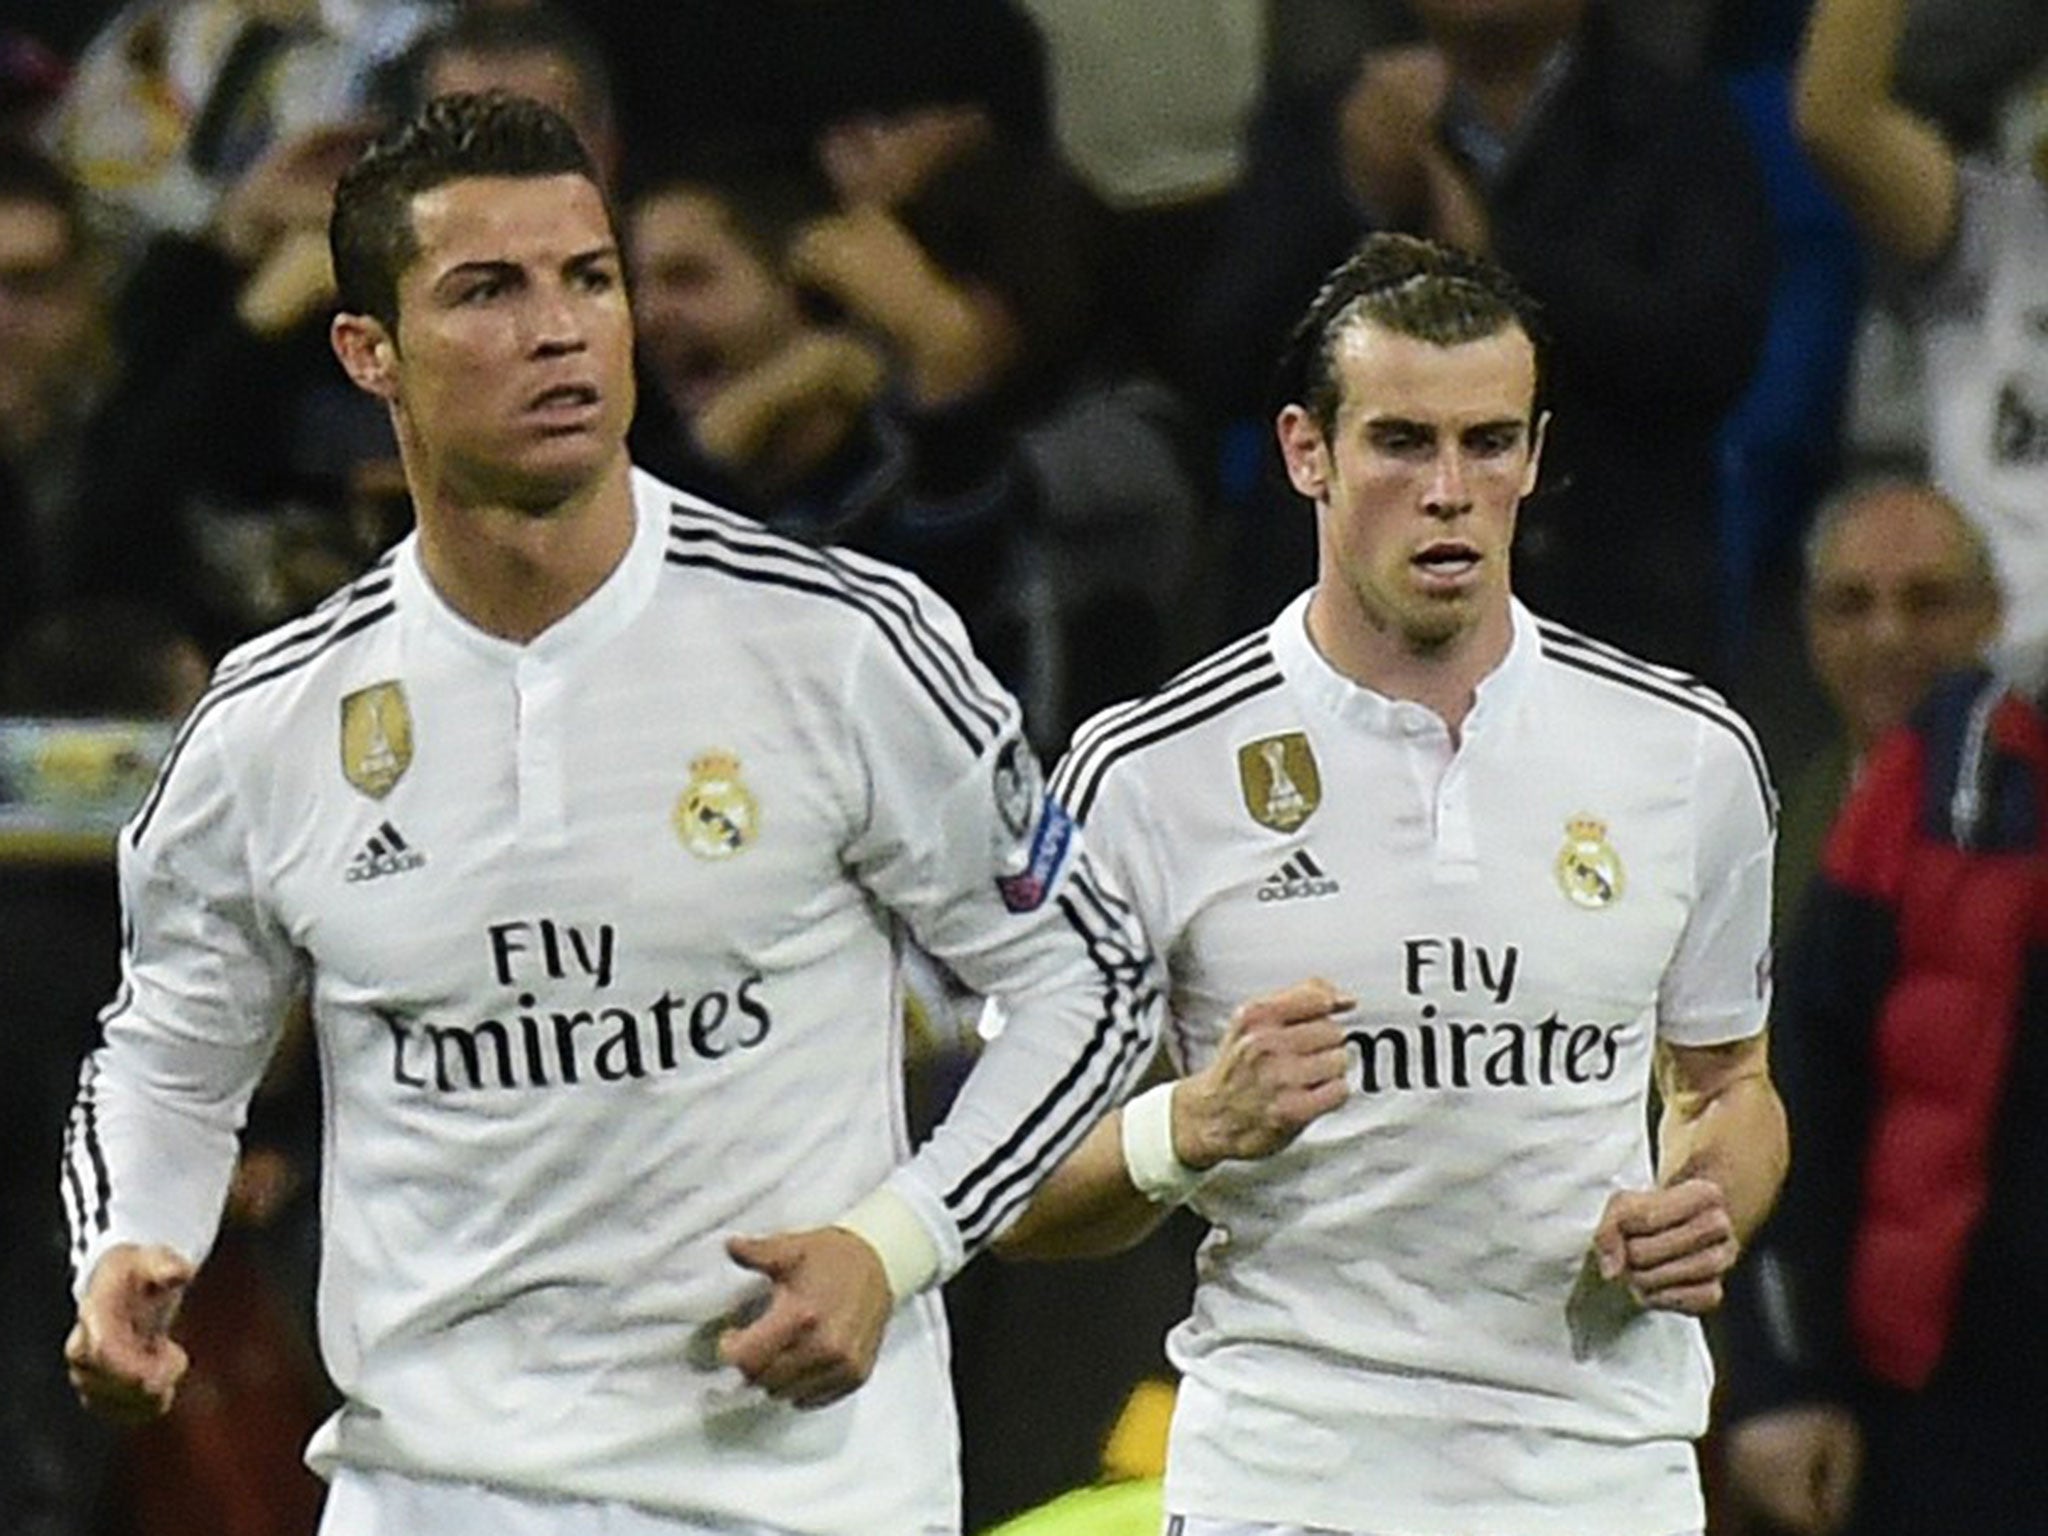 Video: Cristiano Ronaldo didn't look too happy after this Real Madrid goal